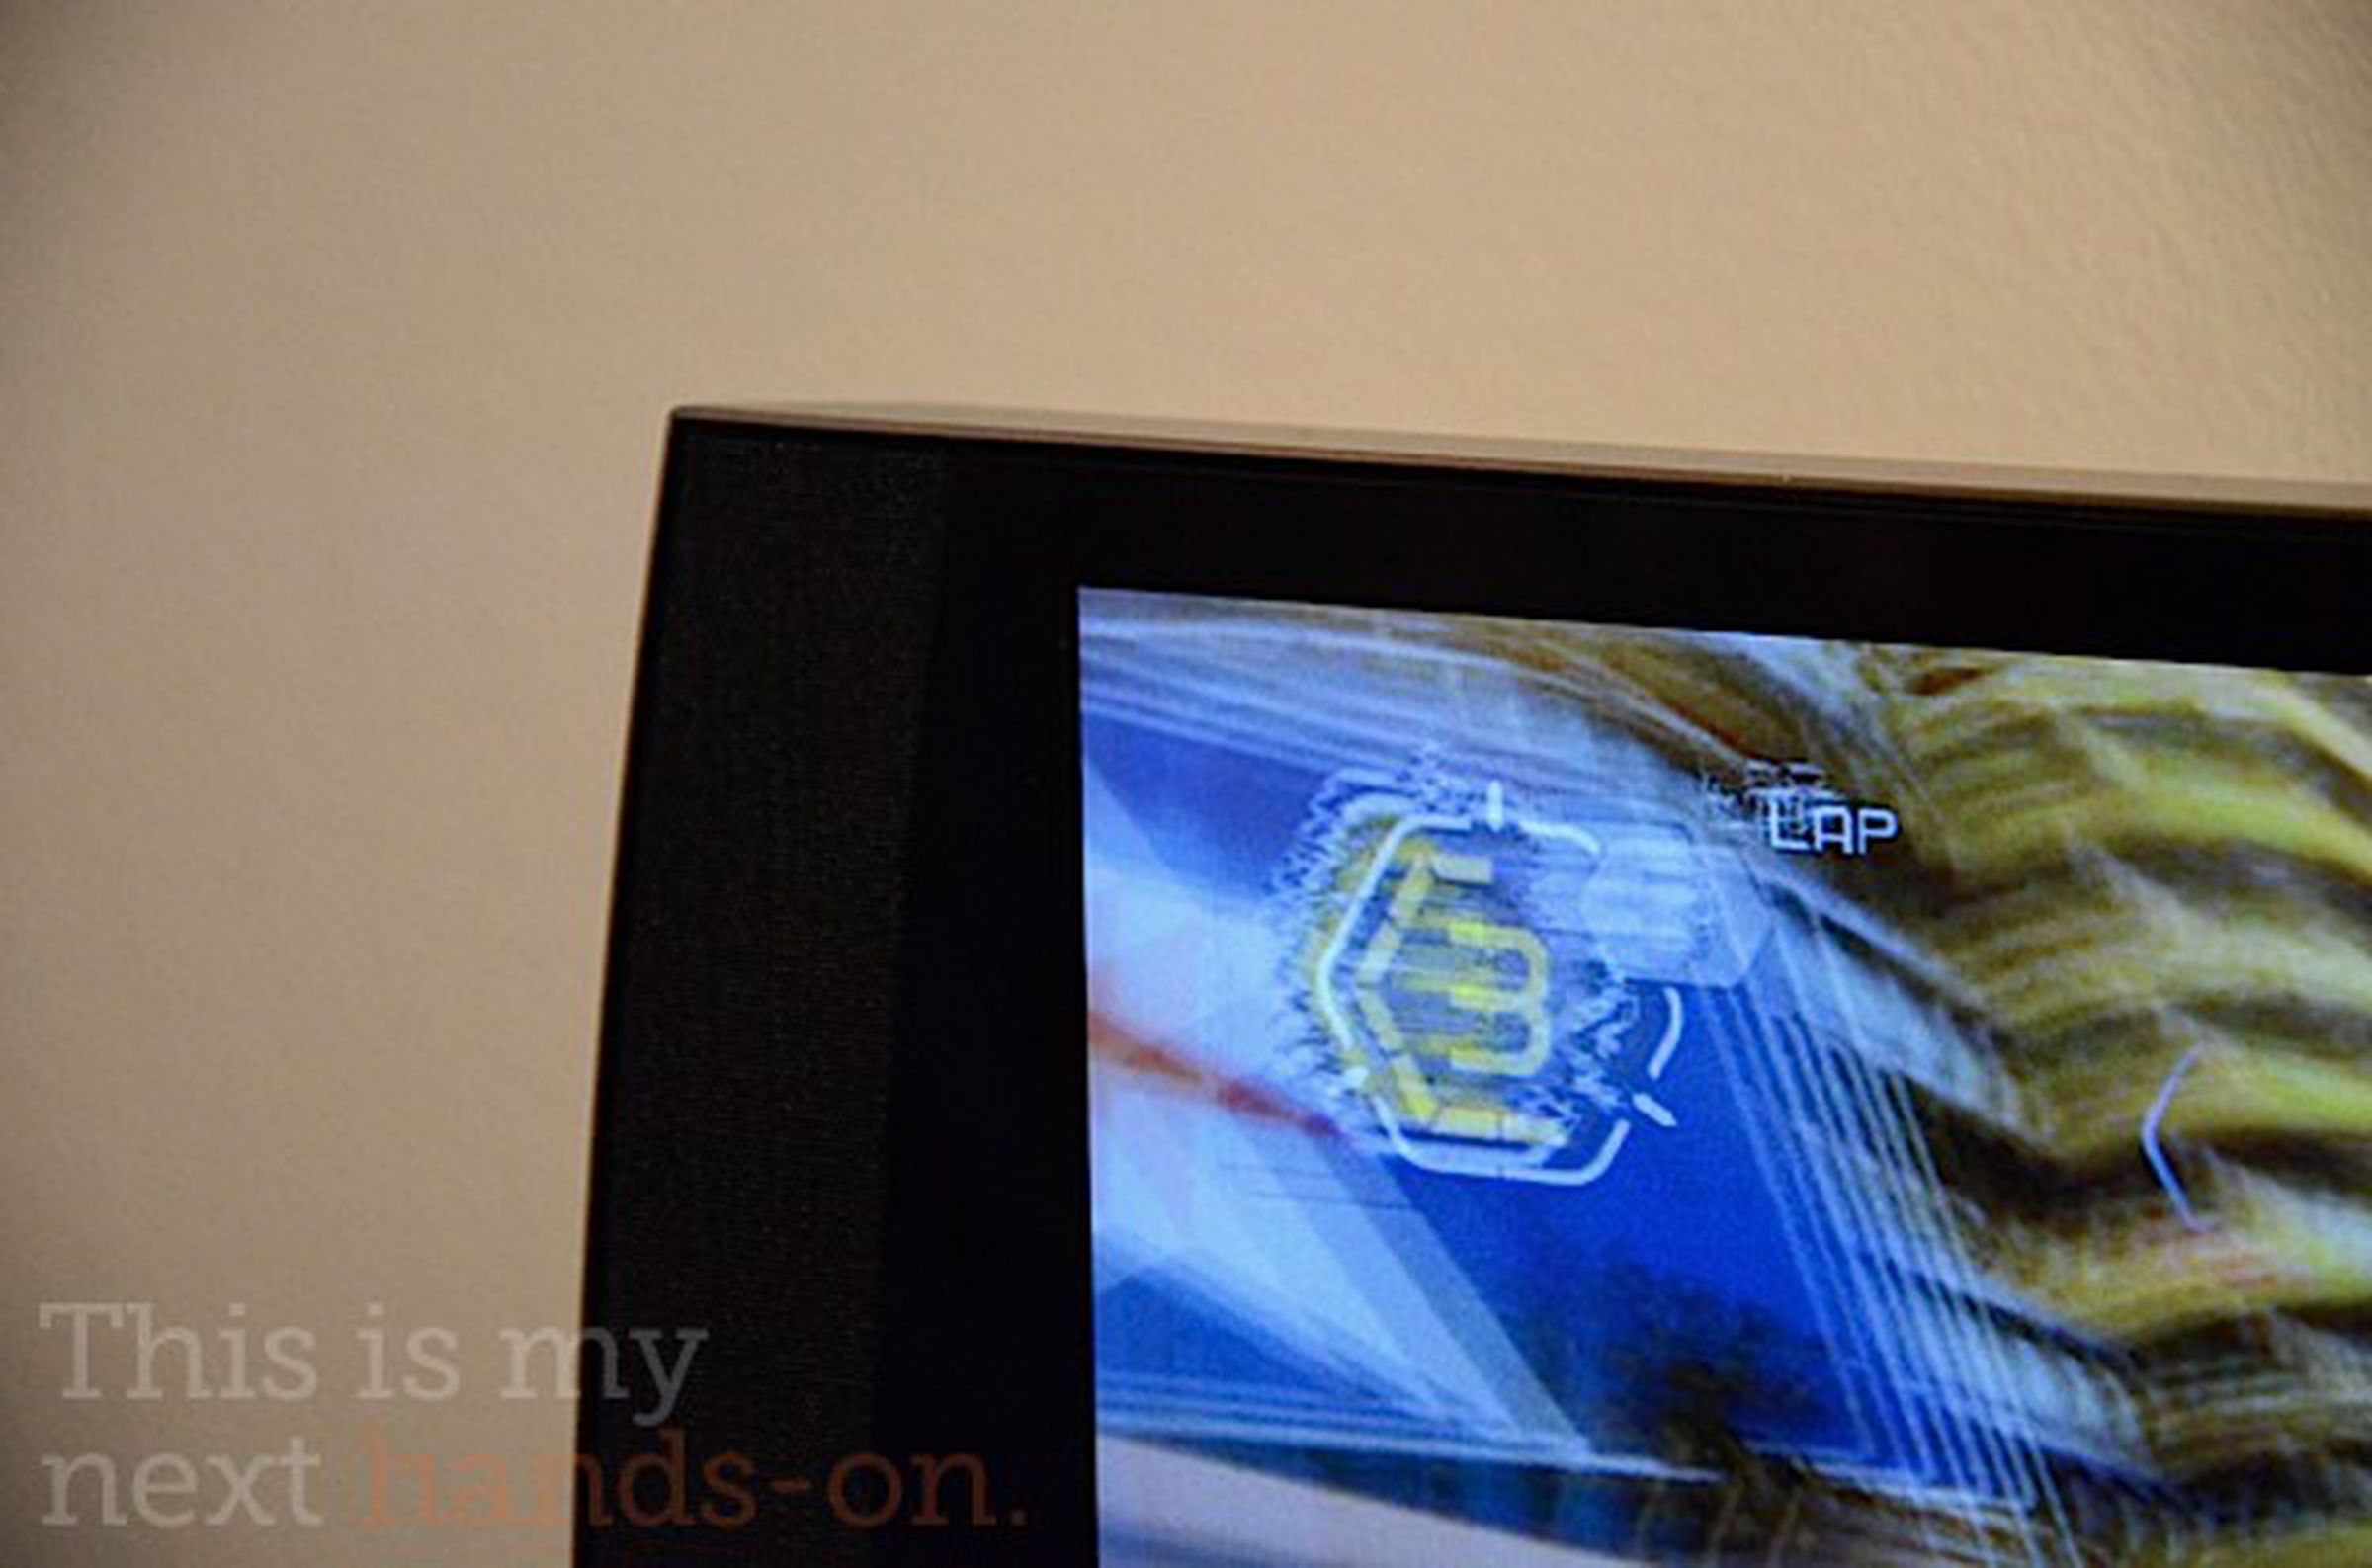 PlayStation 3D display hands-on: two players, one screen